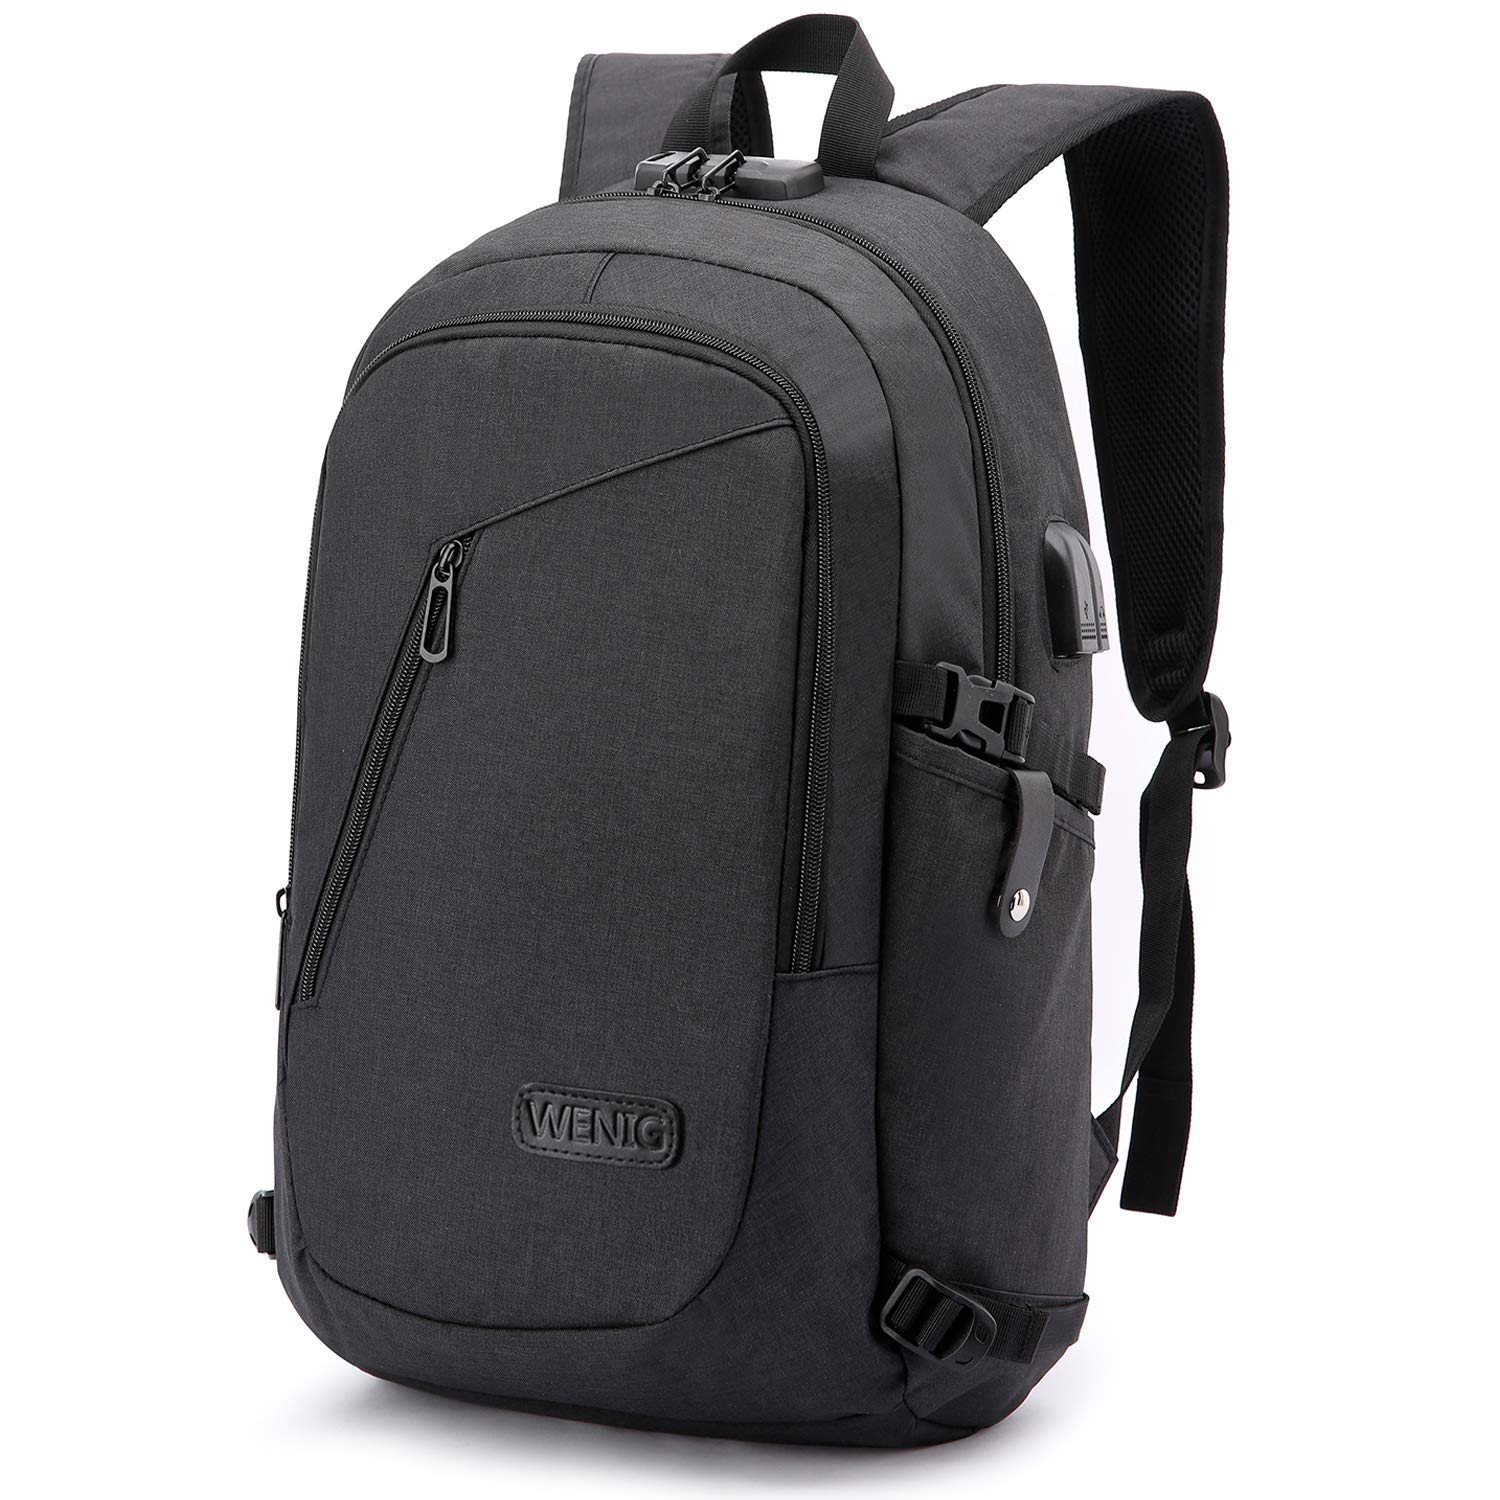 Anti-Theft Business Travel Laptop Backpack for Men and Women: Slim Design with USB Charging Port, Lock, Water-Resistant, Fits 15.6 Inch Laptop Notebook - Durable Work Bag in Black